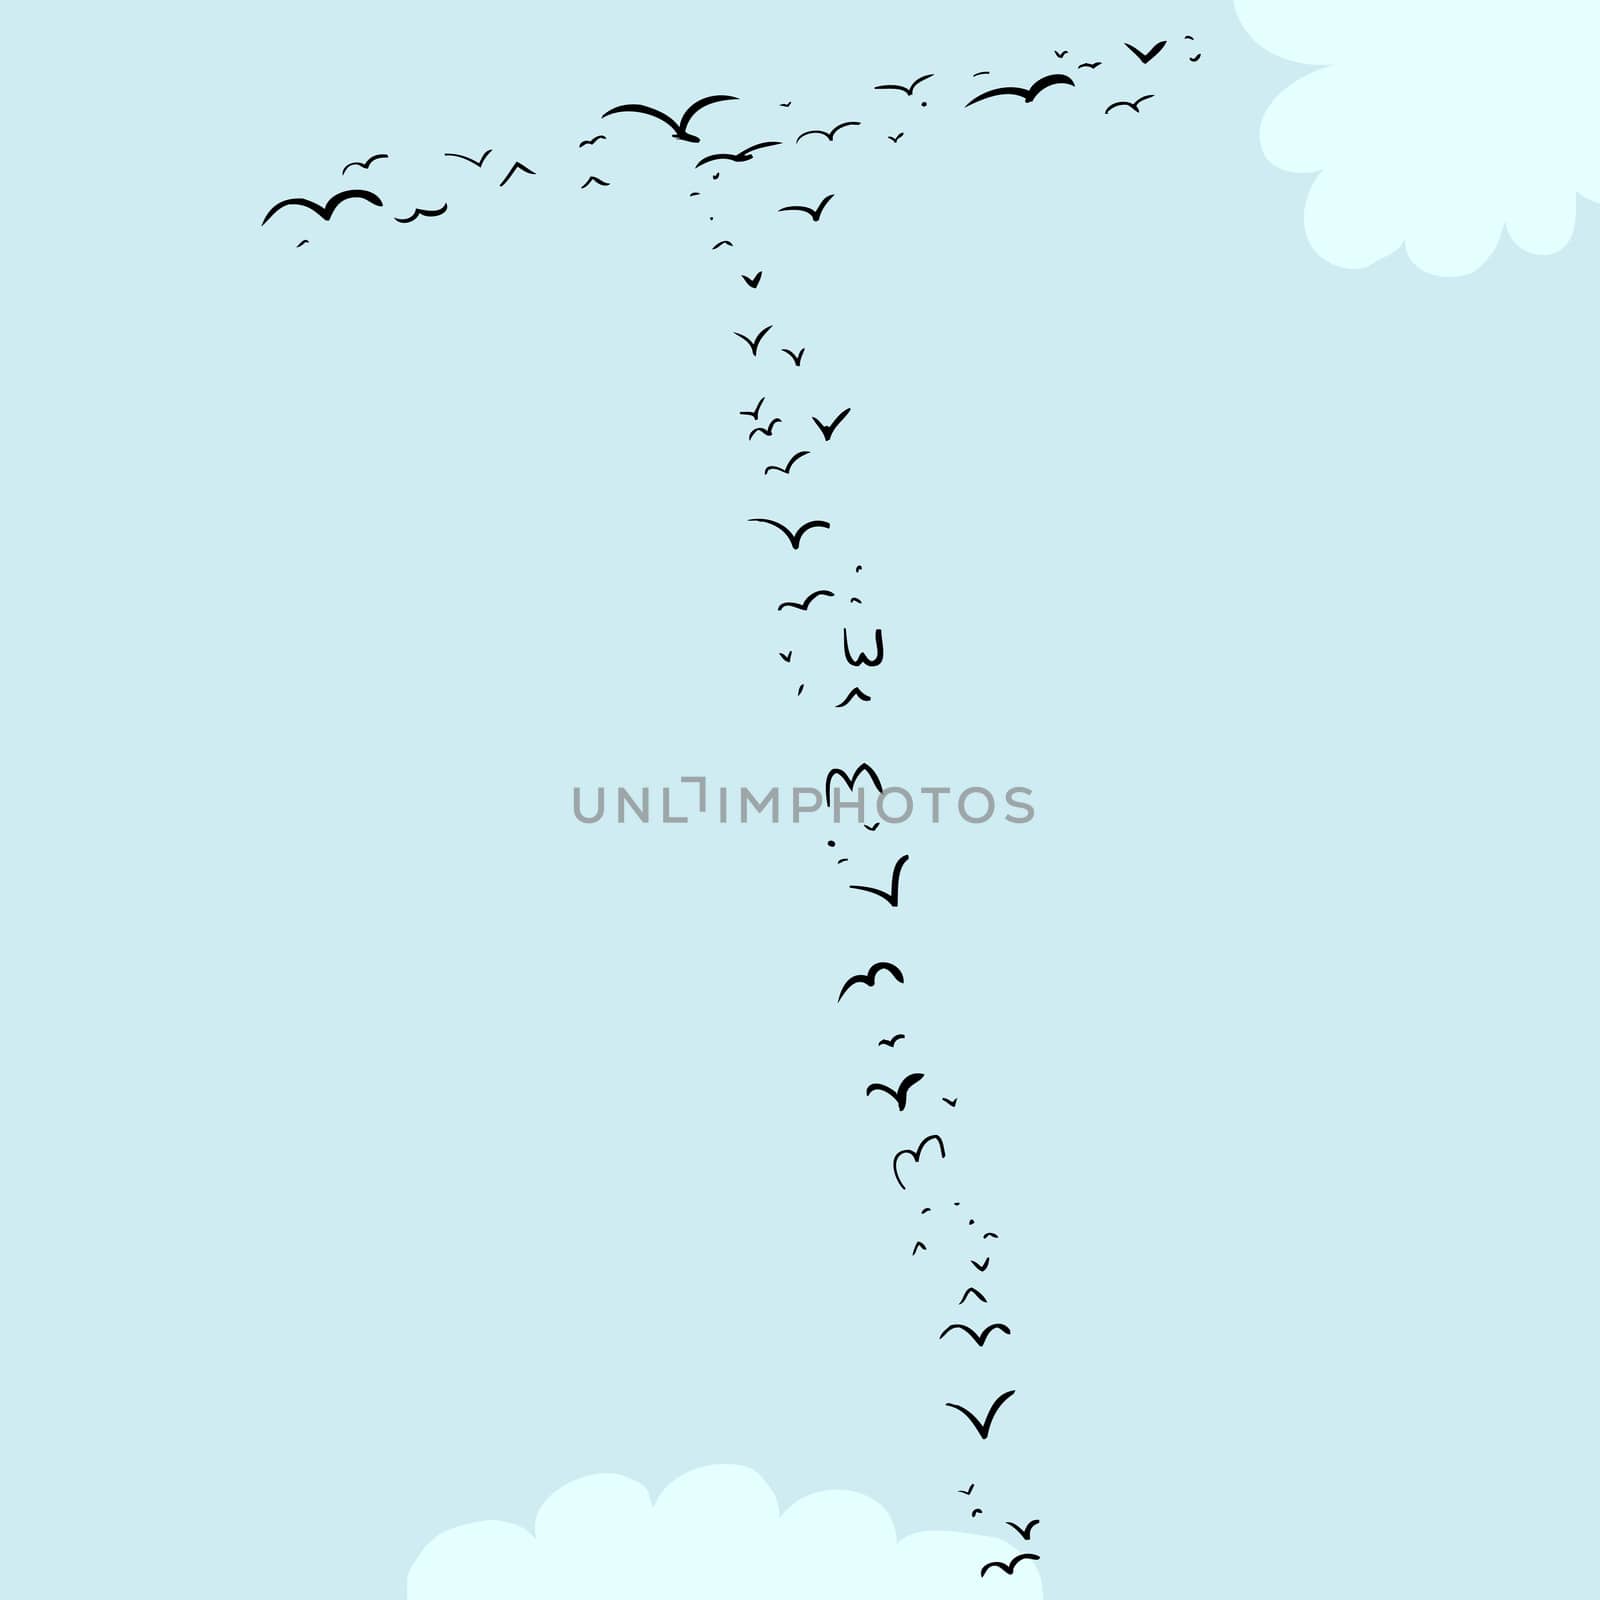 Illustration of a flock of birds in the shape of the letter t